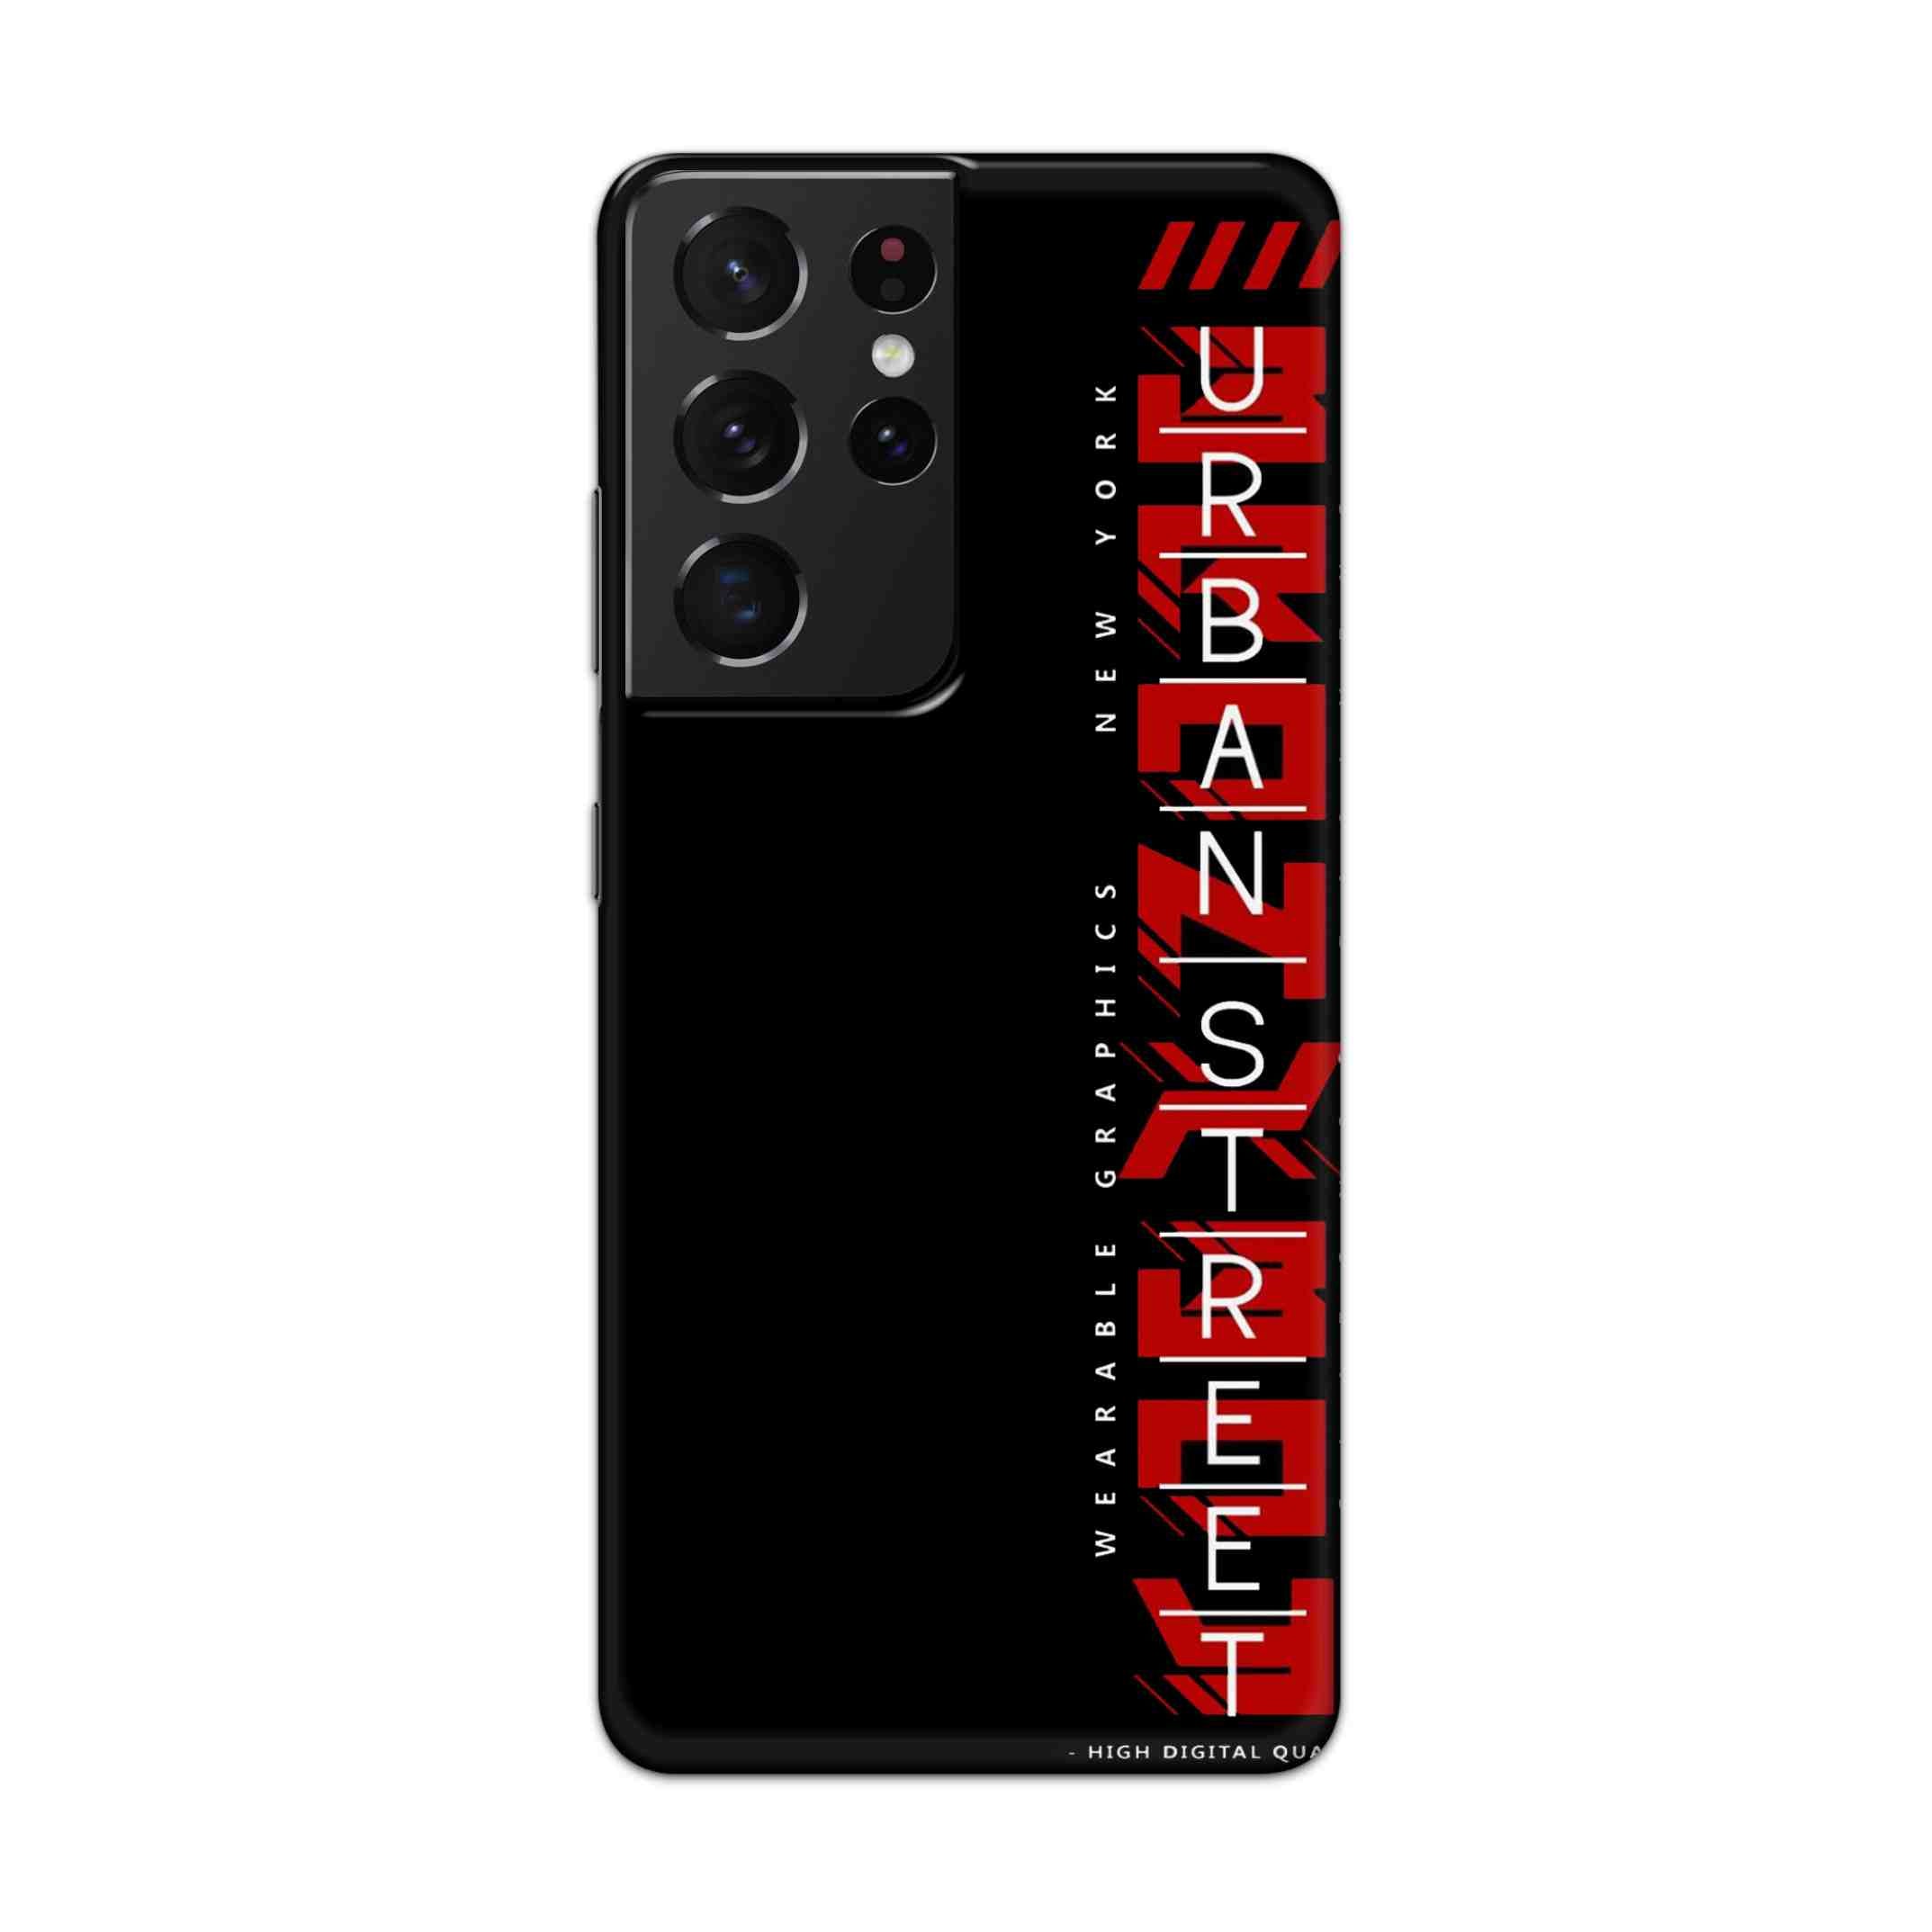 Buy Urban Street Hard Back Mobile Phone Case Cover For Samsung Galaxy S21 Ultra Online